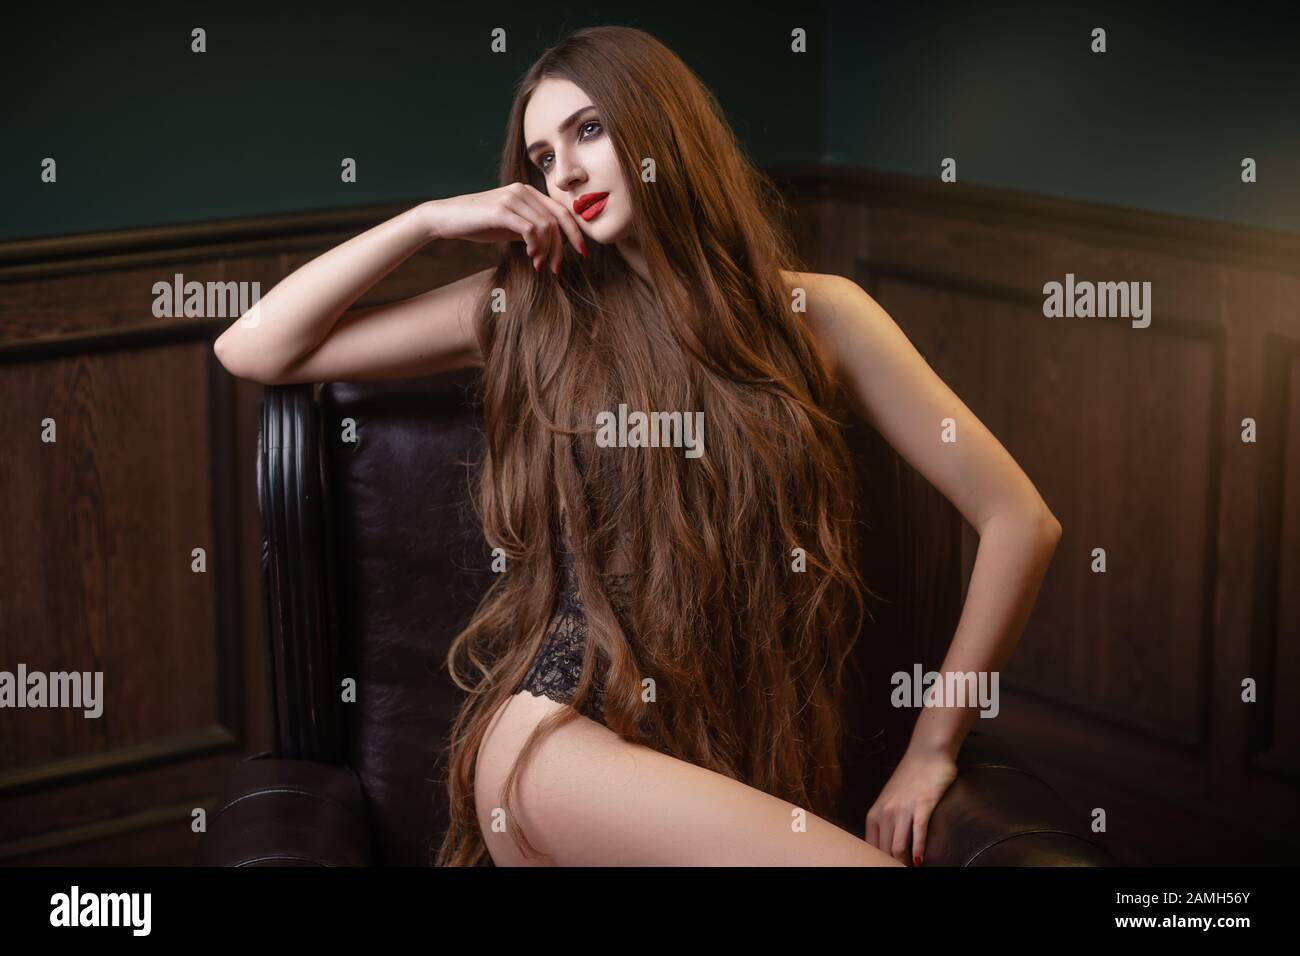 Concept: fashion, sensuality, tenderness, attraction. Beautiful woman with long hair sensual black lingerie studio photoshoot Stock Photo